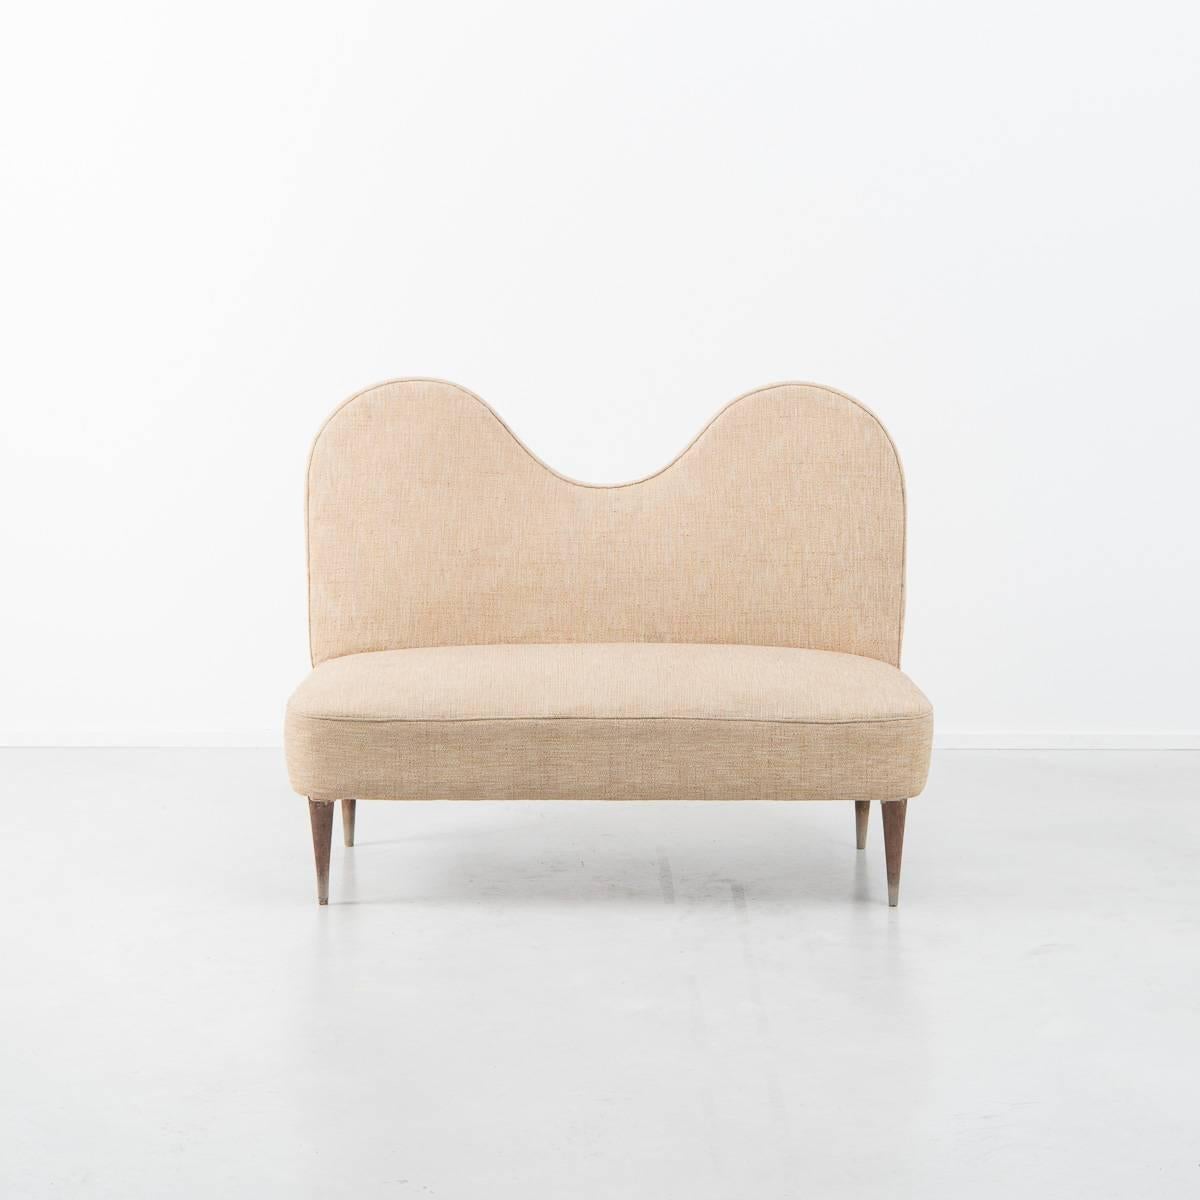 This cute curved upholstered sofa really has a load of playfulness to it. Sat on four tapered wooden legs and featuring an exaggerated curved back rest, it beautifully distils key aesthetics featured within 1950’s Italian design.

The design is